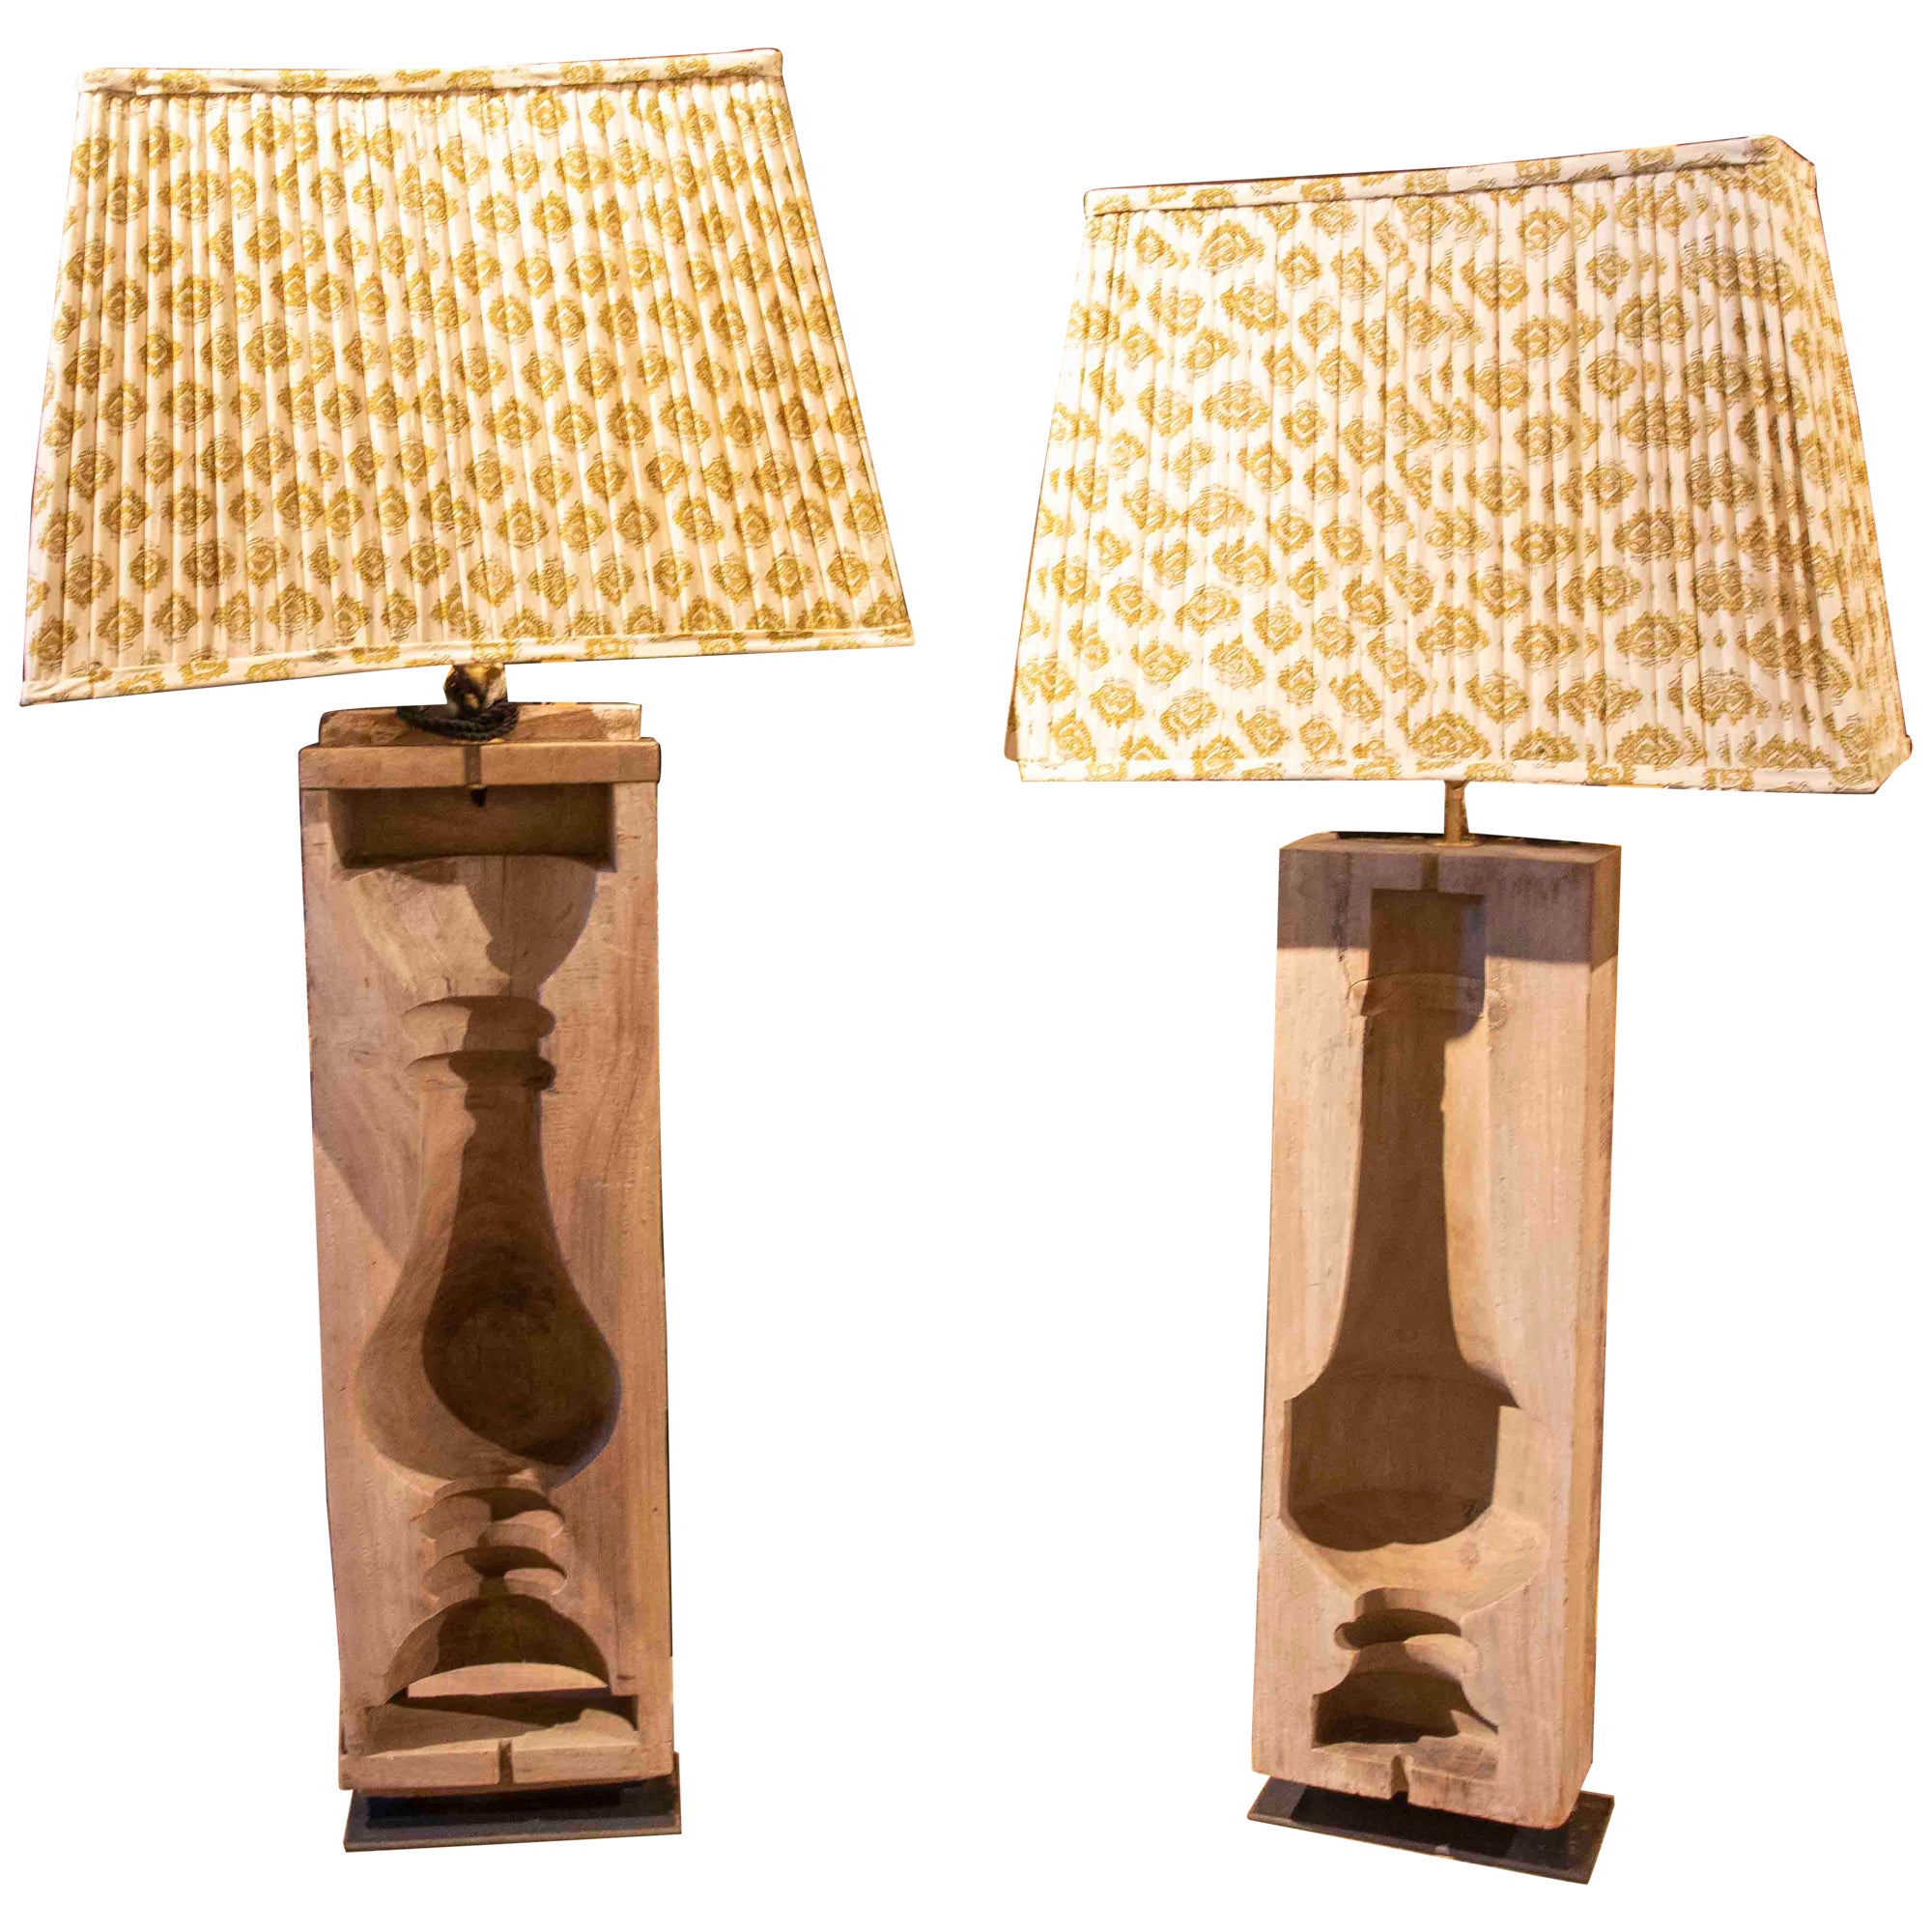 Pair of Lamps Made from Wooden Moulds with Flattened Lampshades